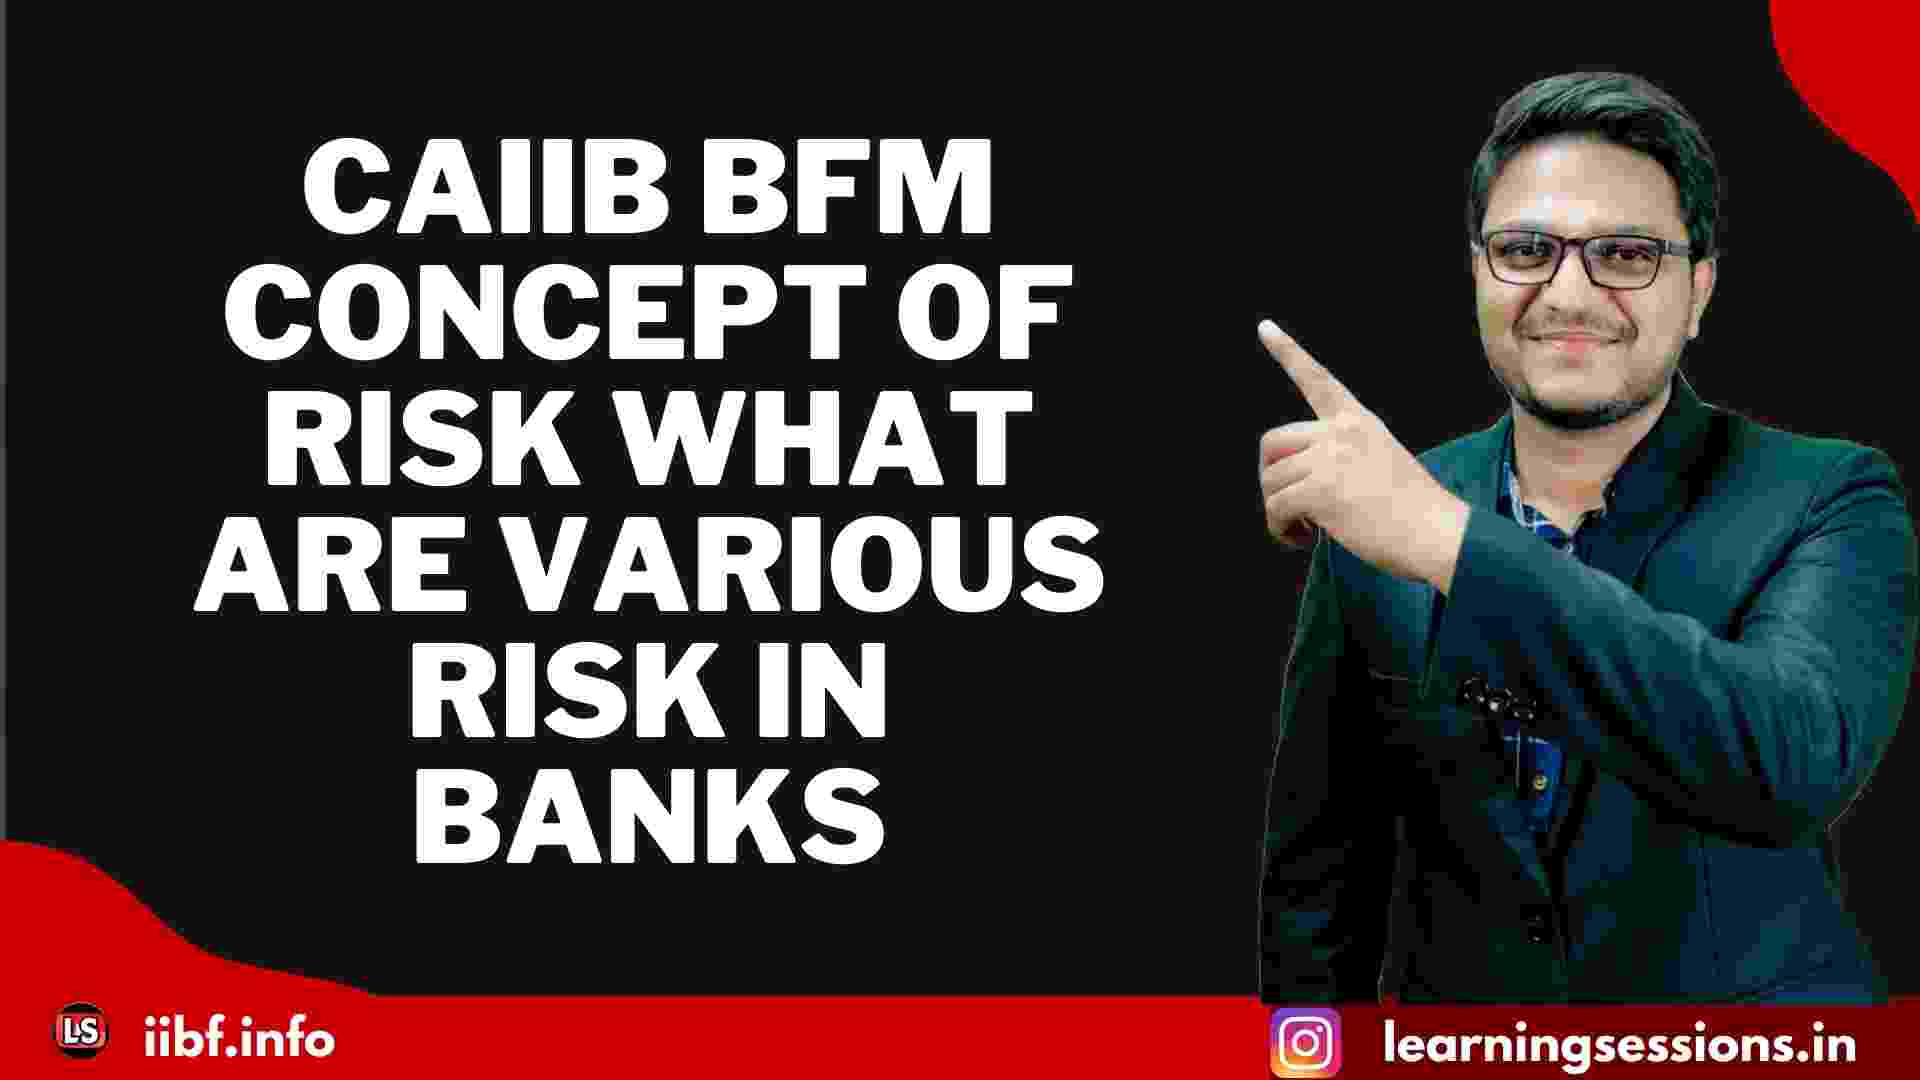 CAIIB BFM CONCEPT OF RISK WHAT ARE VARIOUS RISK IN BANKS